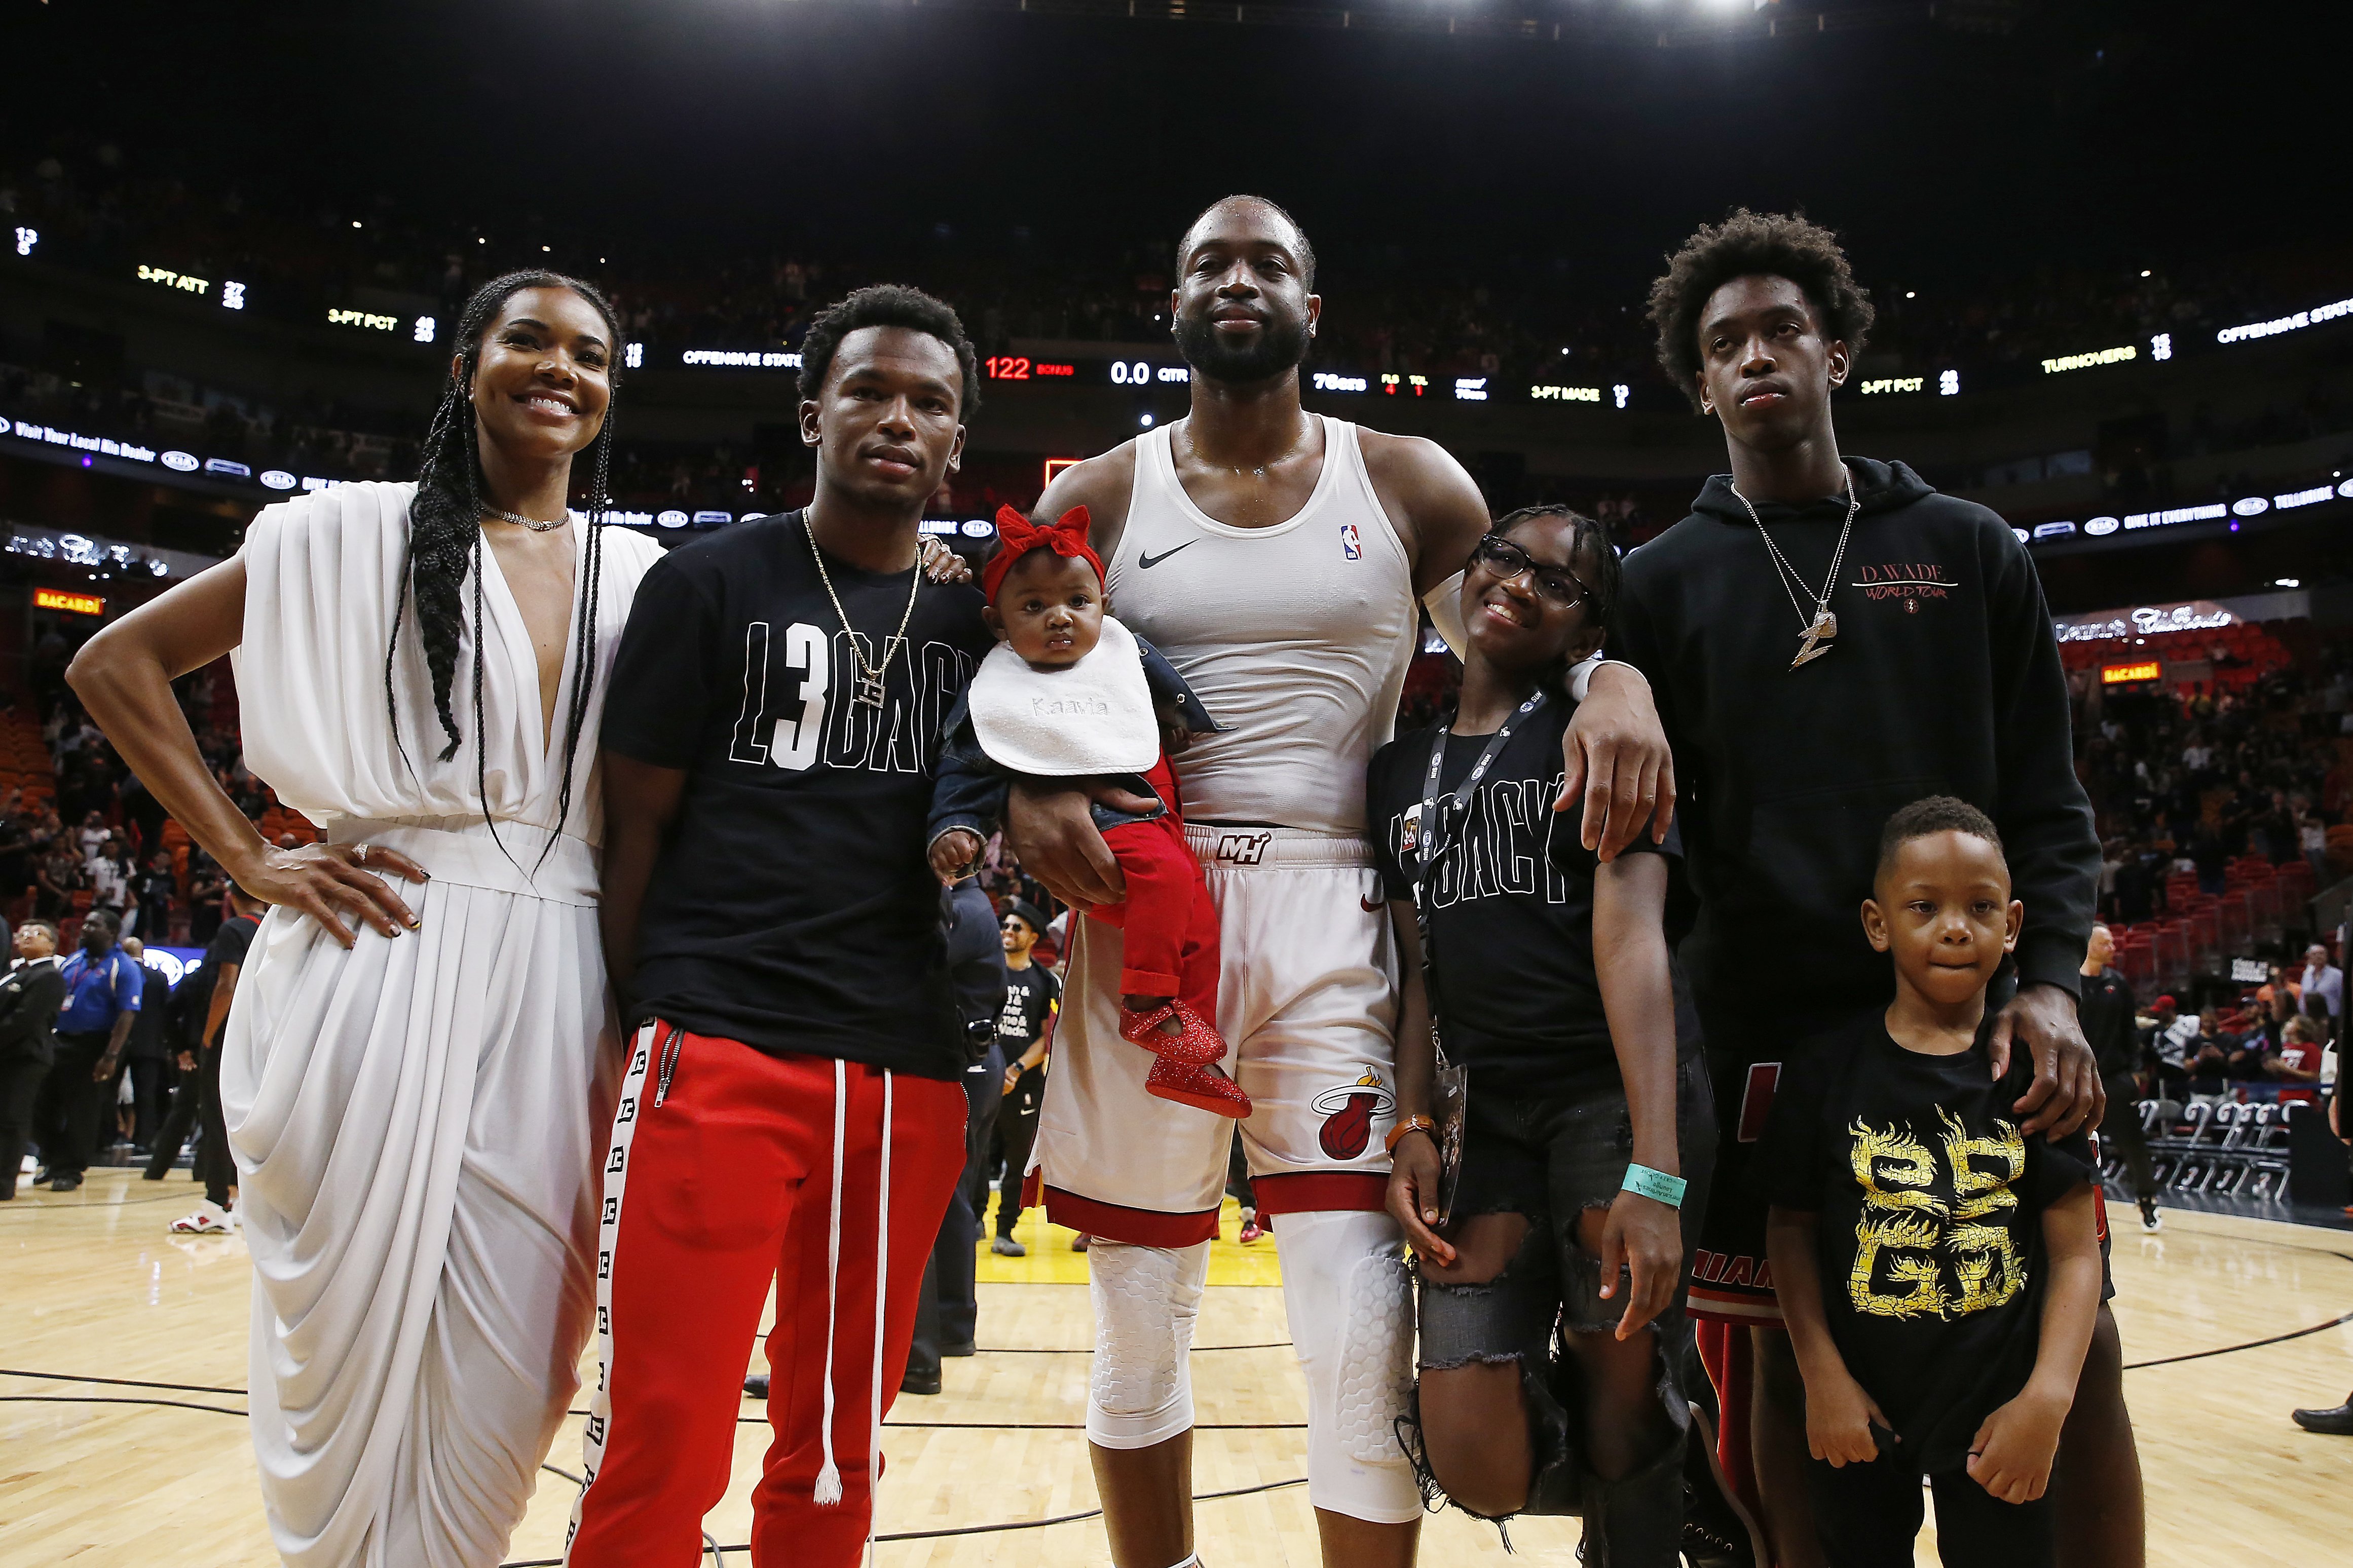 Dwayne Wade (center) with (L-R) wife Gabrielle Union, his nephew Dahveon Morris, and children Kaavia, Zion, Zaire & Xavier at Dwyane’s final home game in Miami on Apr.09, 2019. |Photo: Getty Images.